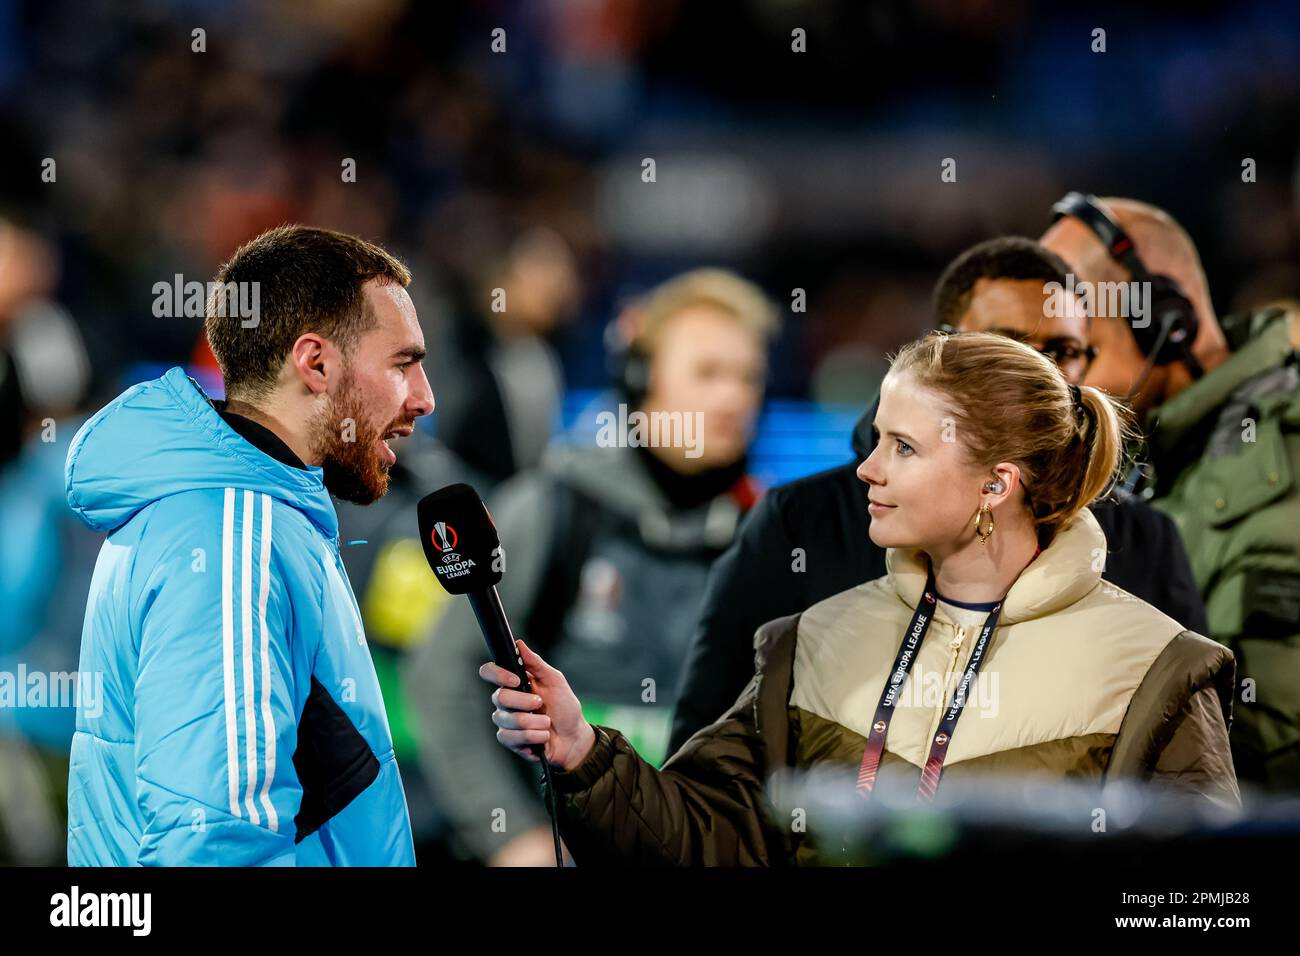 Stadion Feijenoord, Netherlands. 13th Apr, 2023. STADION FEIJENOORD, NETHERLANDS - APRIL 13: Orkun Kokcu of Feyenoord is interviewed by Noa Vahle presenter of RTL 7 during the Quarterfinal First Leg - UEFA Europa League match between Feyenoord and AS Roma at the Rotterdam on April 13, 2023 in Stadion Feijenoord, Netherlands (Photo by Marcel ter Bals/Orange Pictures) Credit: Orange Pics BV/Alamy Live News Stock Photo